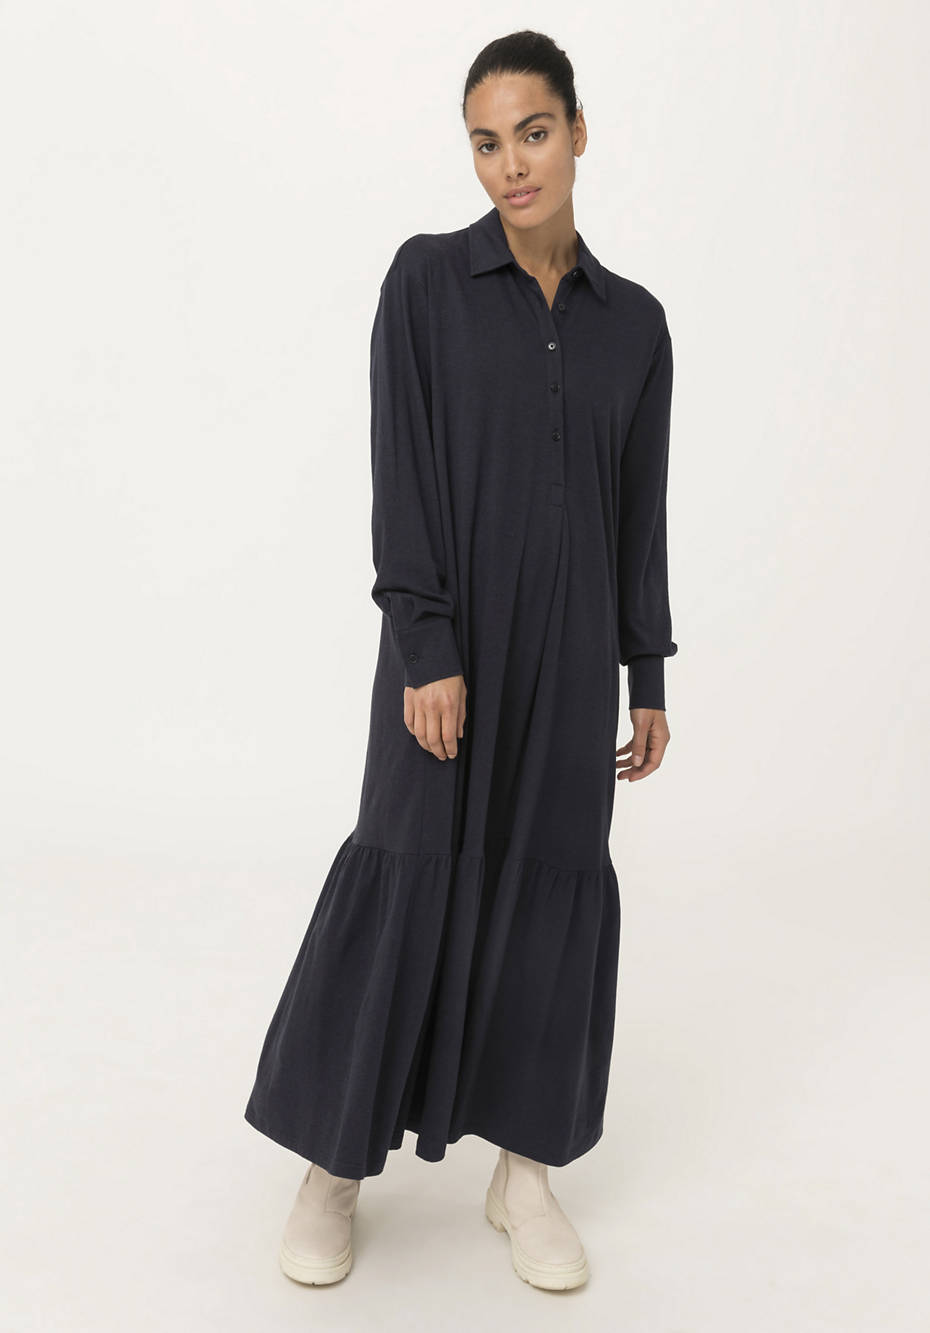 Midi dress made from organic cotton with organic new wool